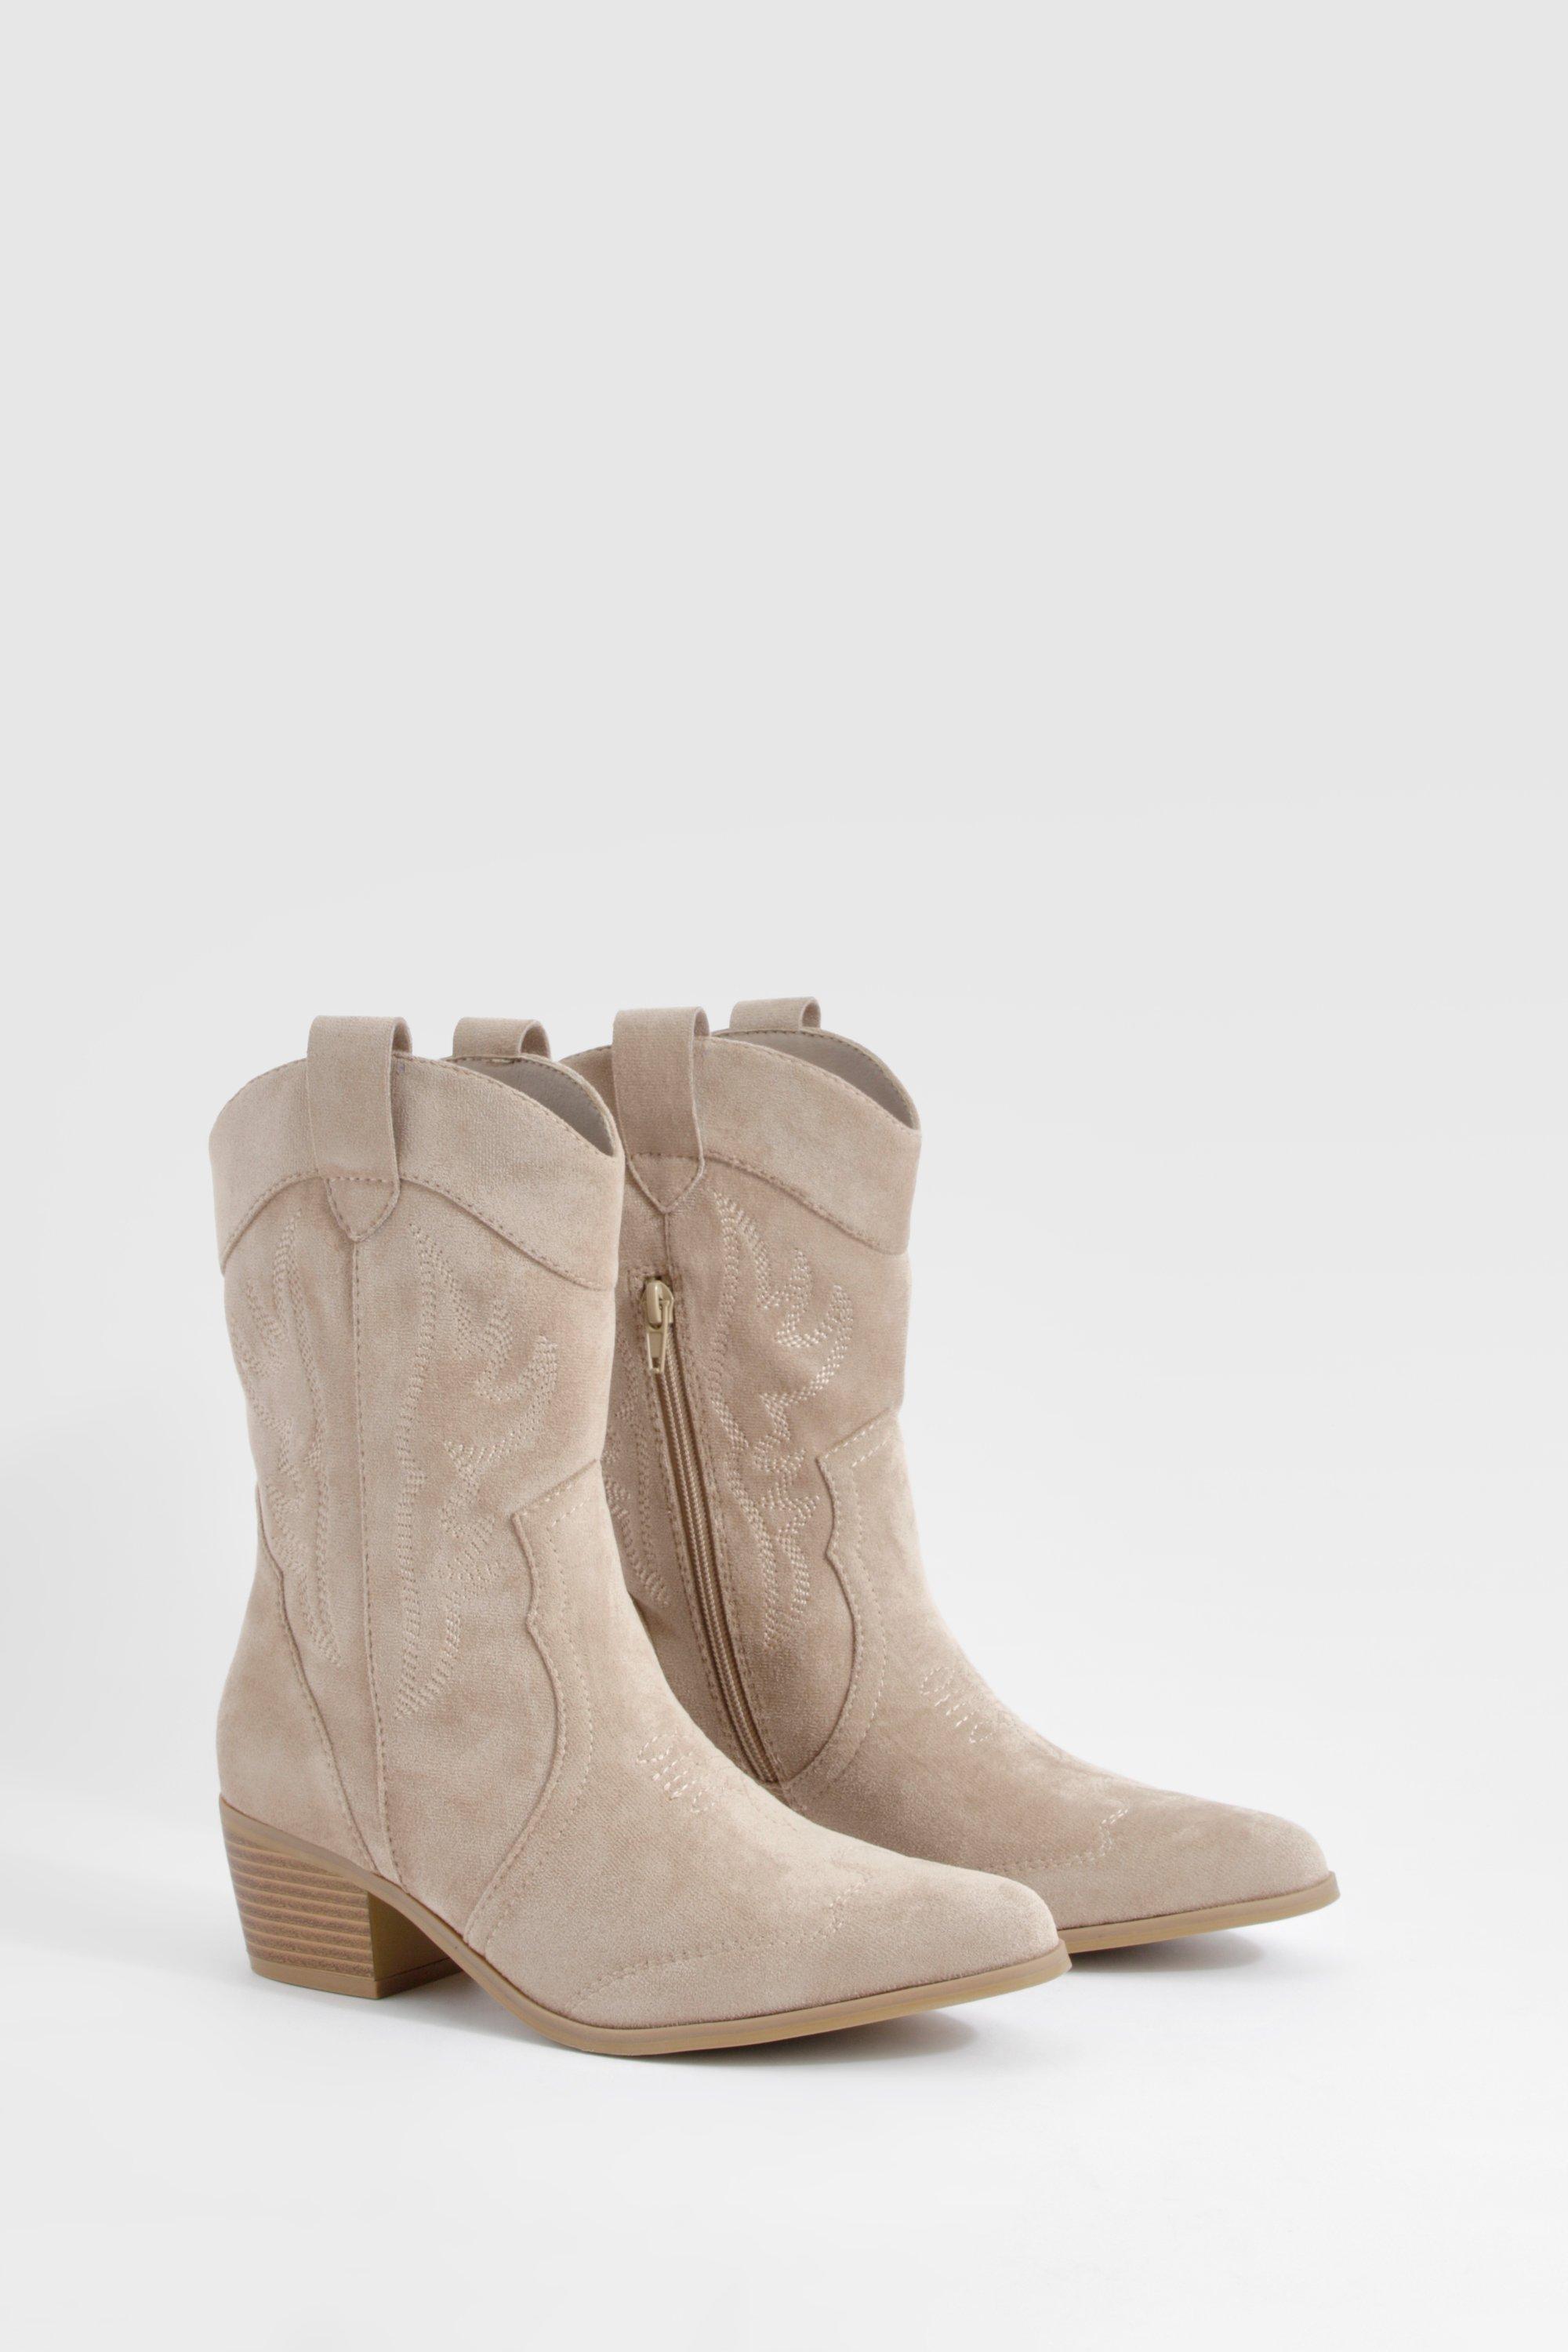 Boohoo Embroidered Western Ankle Cowboy Boots, Light Beige